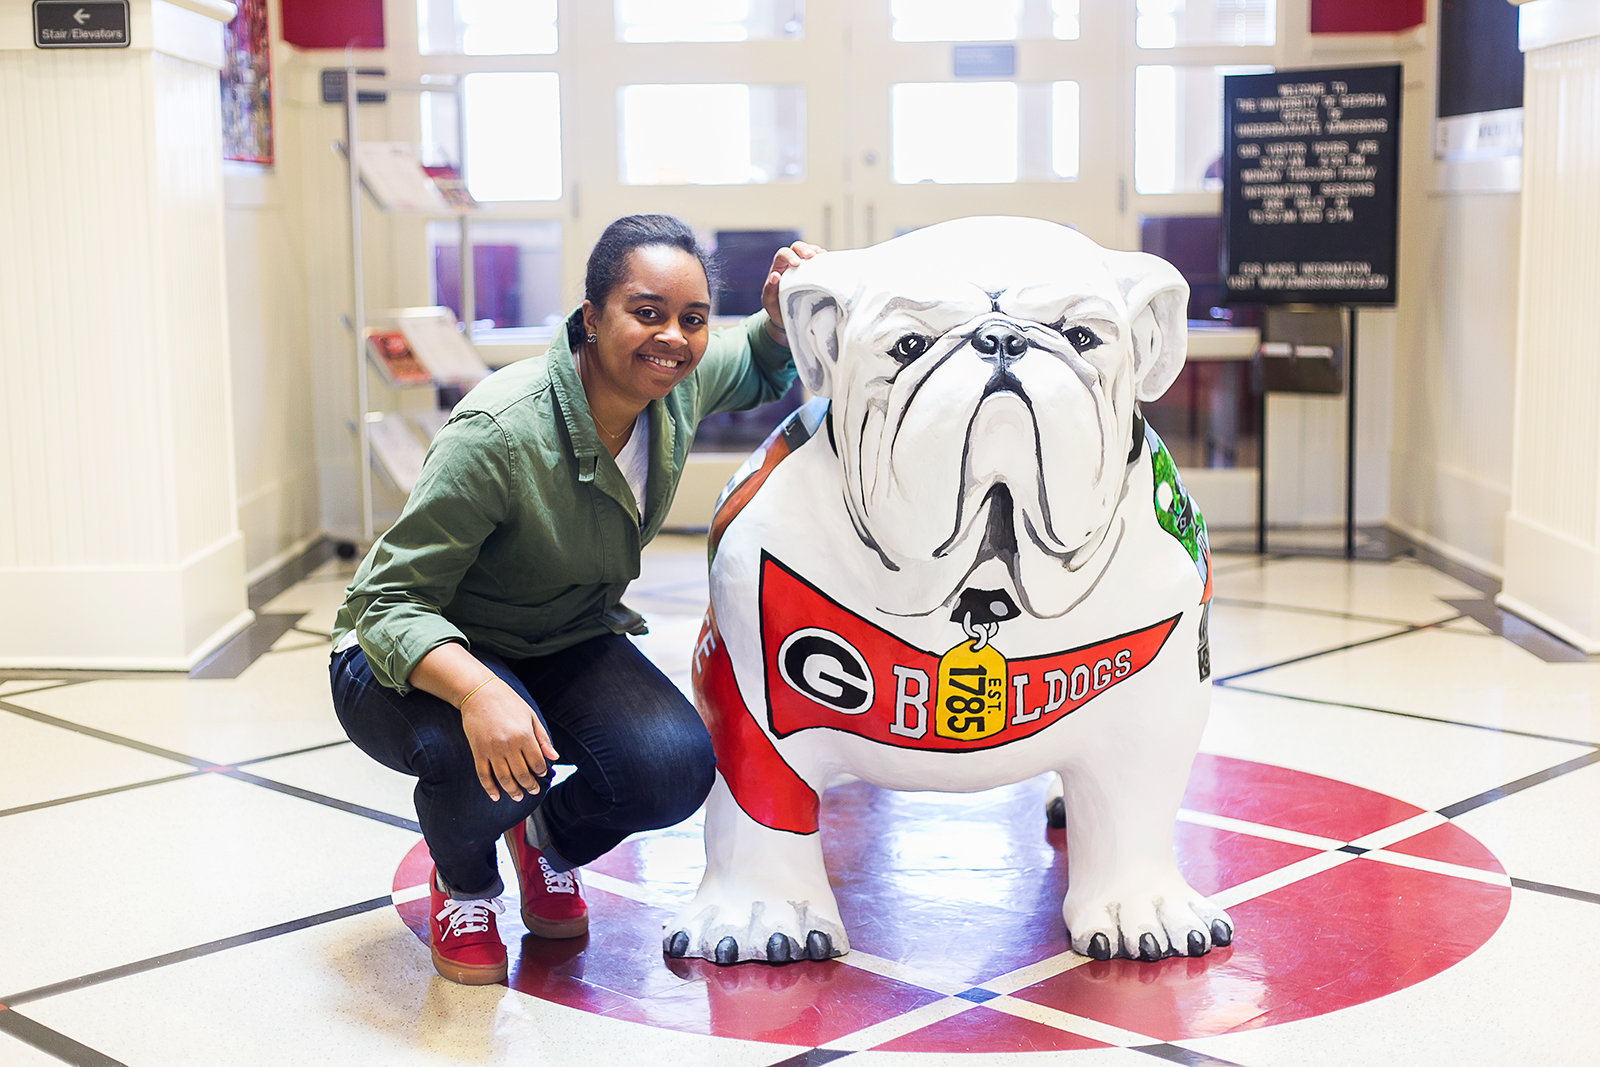  I wanted Terrell's front to be recognizable as an actual&nbsp;bulldog - the proud mascot of UGA. The spirit of the pennant and dog tag (with the year of UGA's charter)&nbsp;offer&nbsp;a great photo op to his many visitors (including future Bulldogs)